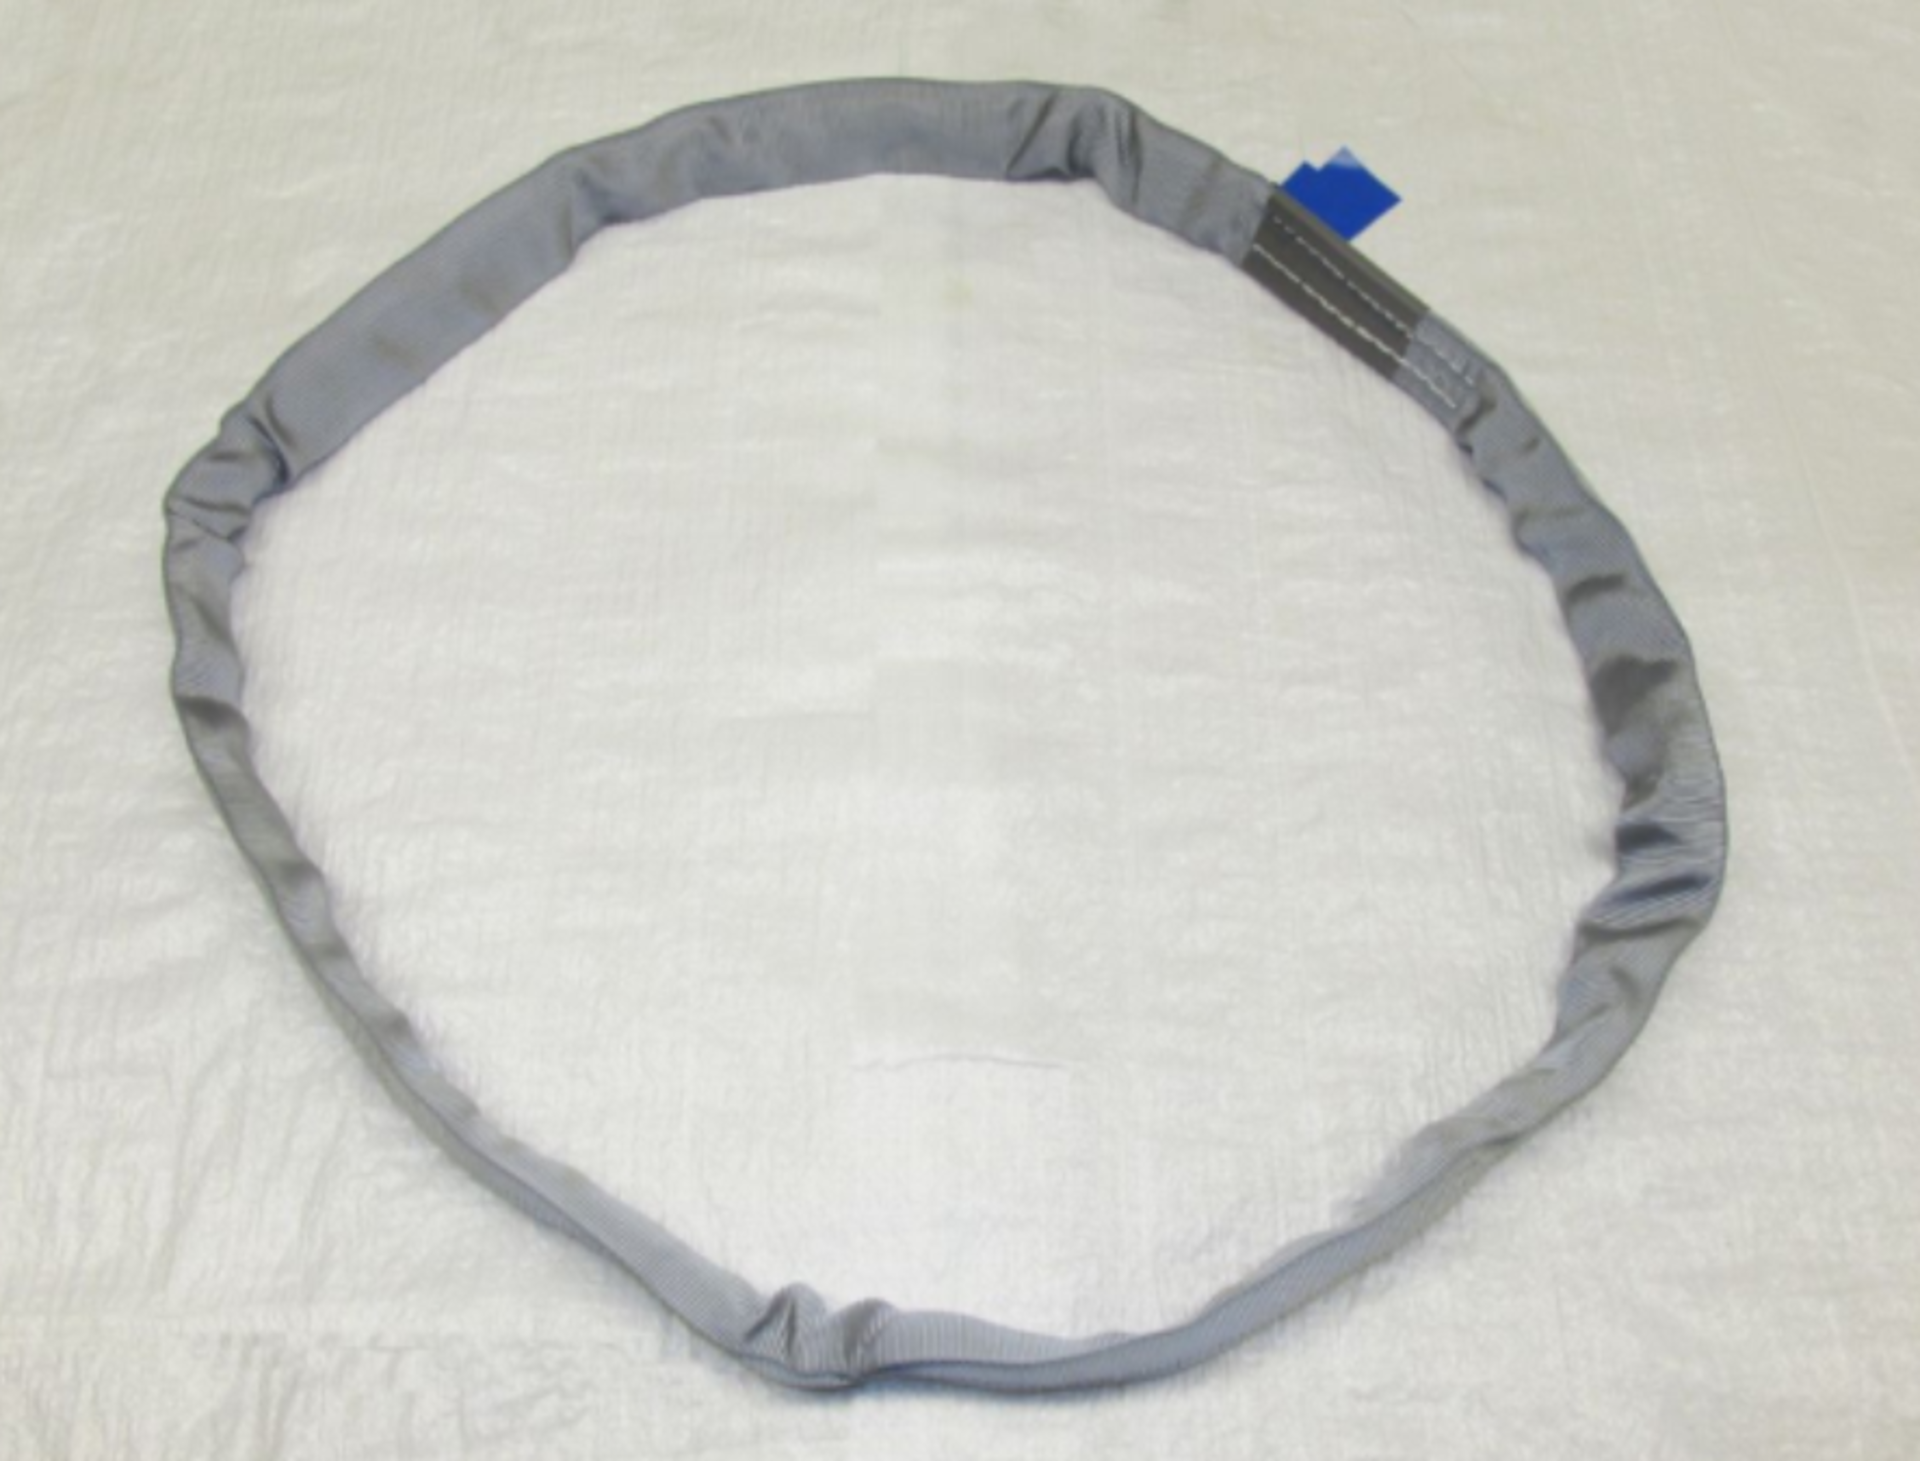 10 x 4 ton 5m round sling (rs4t5)